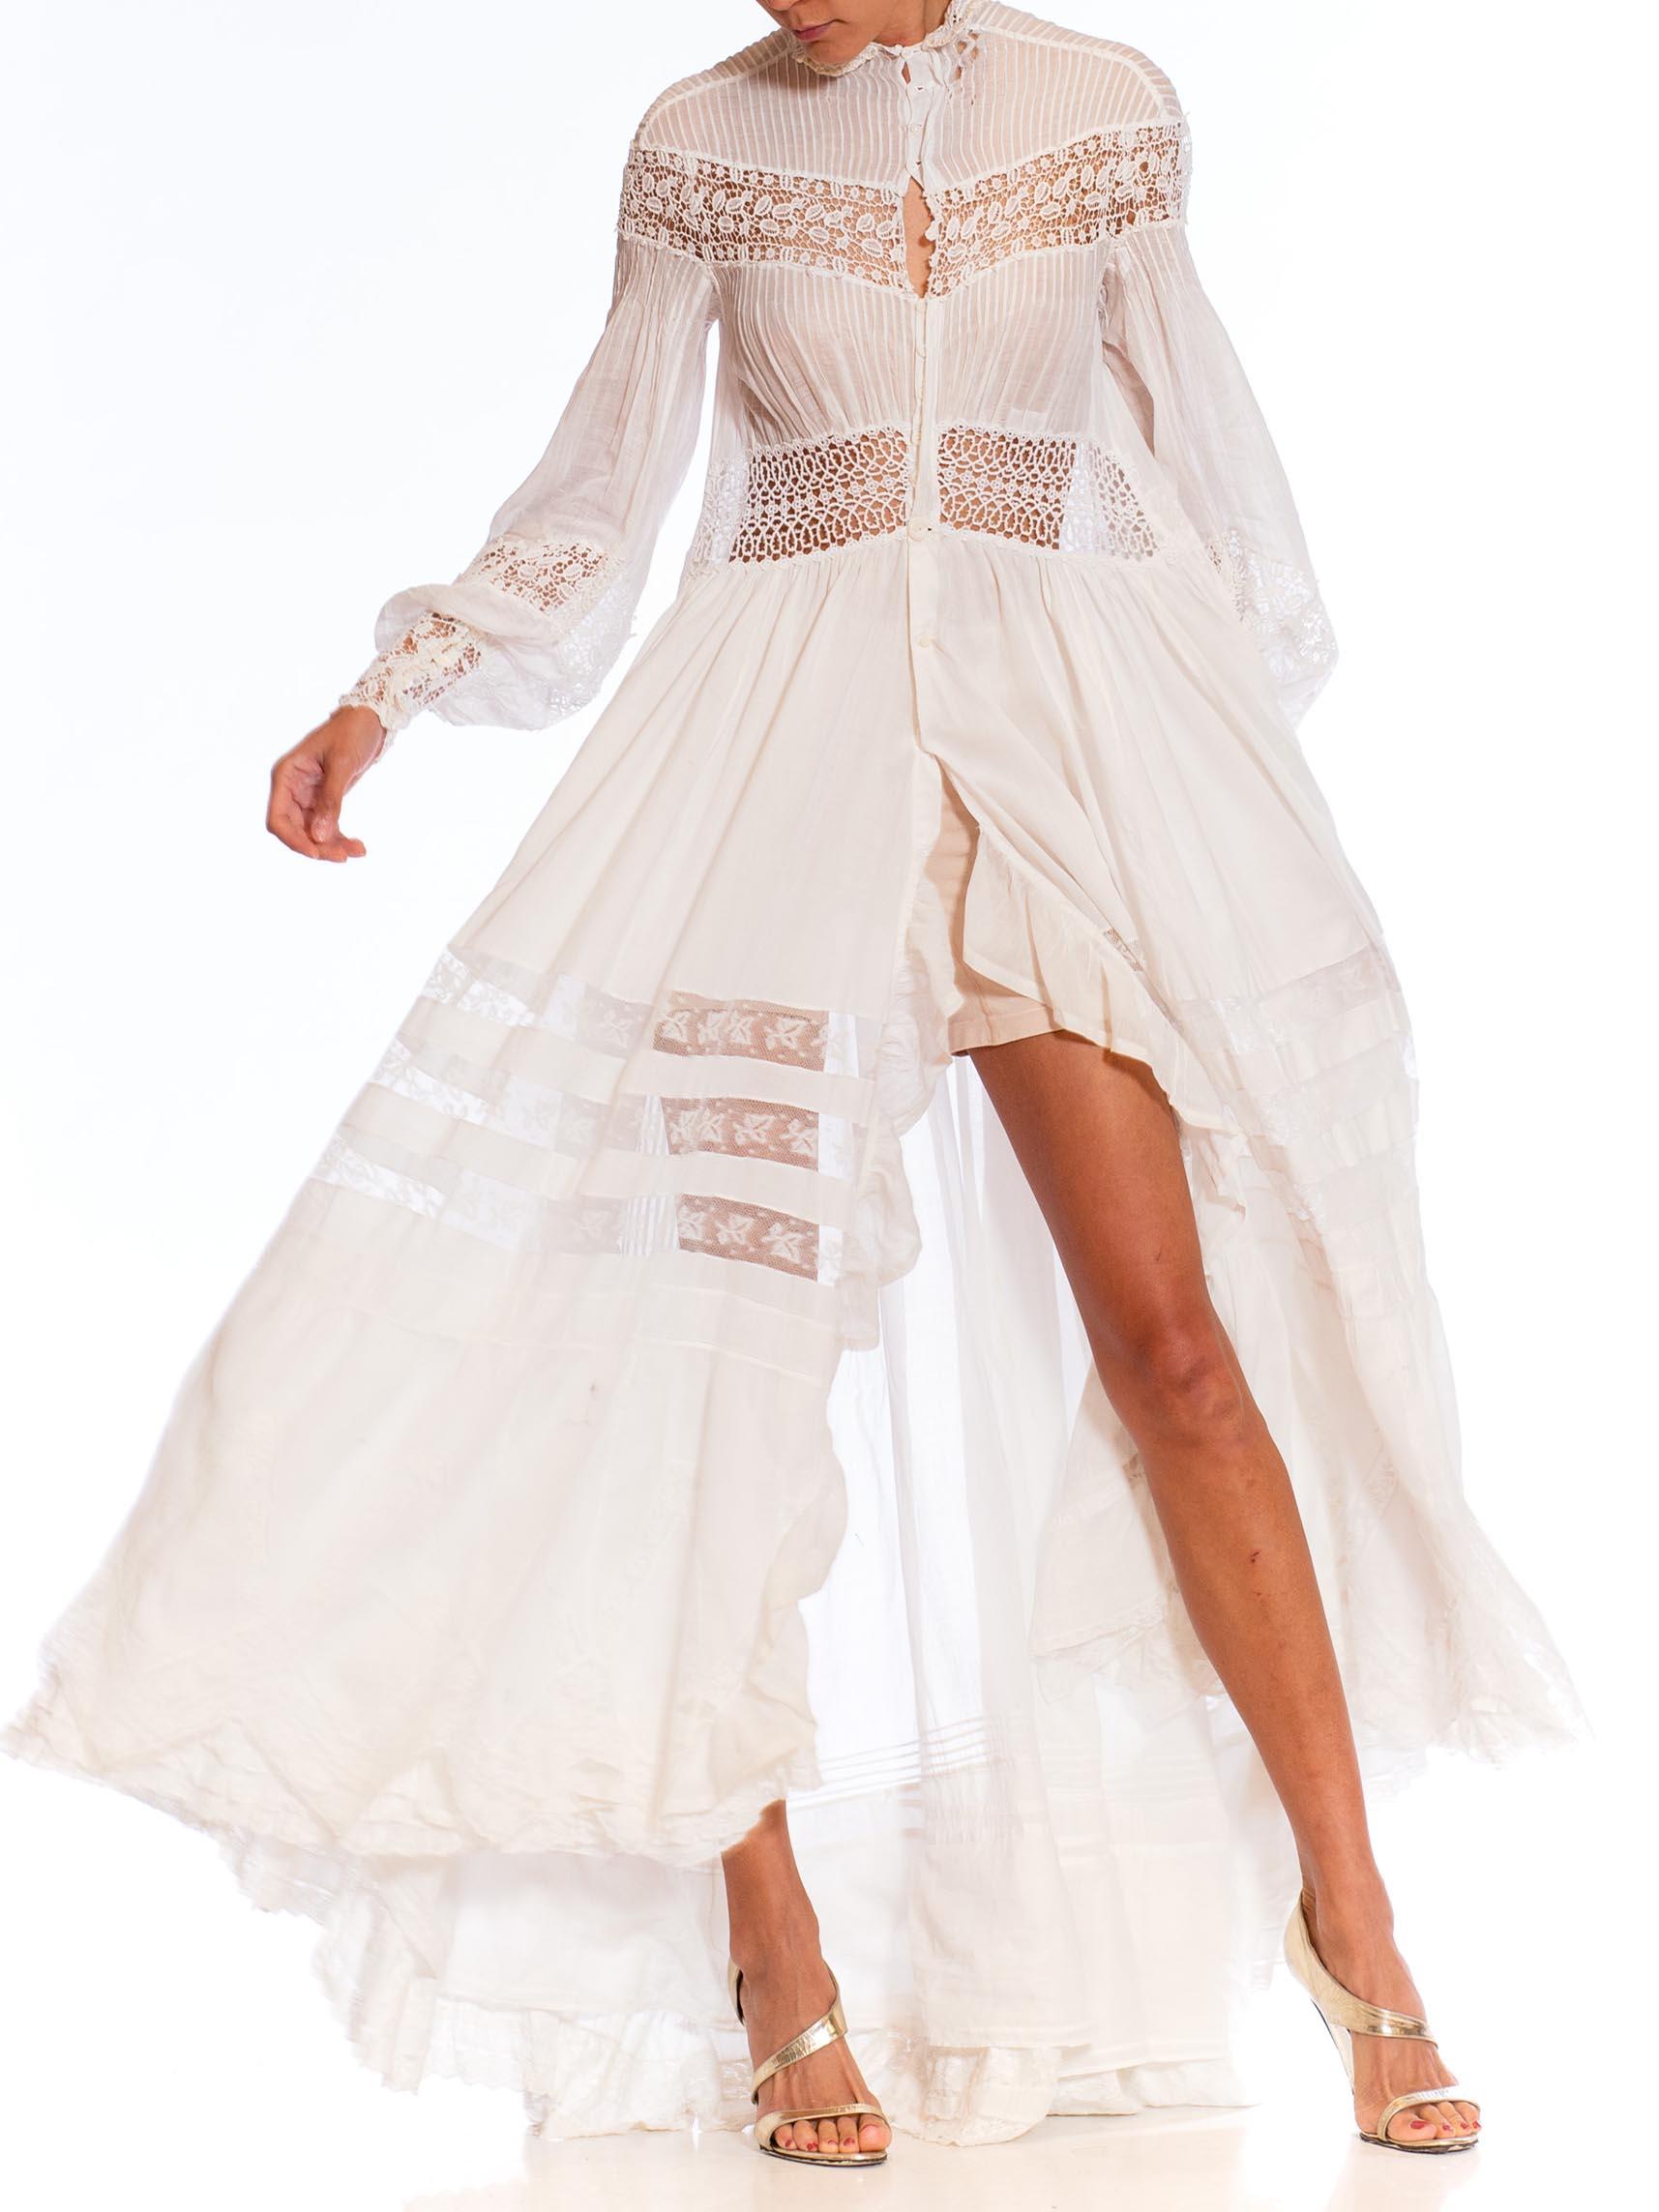 Morphew Atelier White Victorian Cotton & Lace Oversized Gown For Sale 3